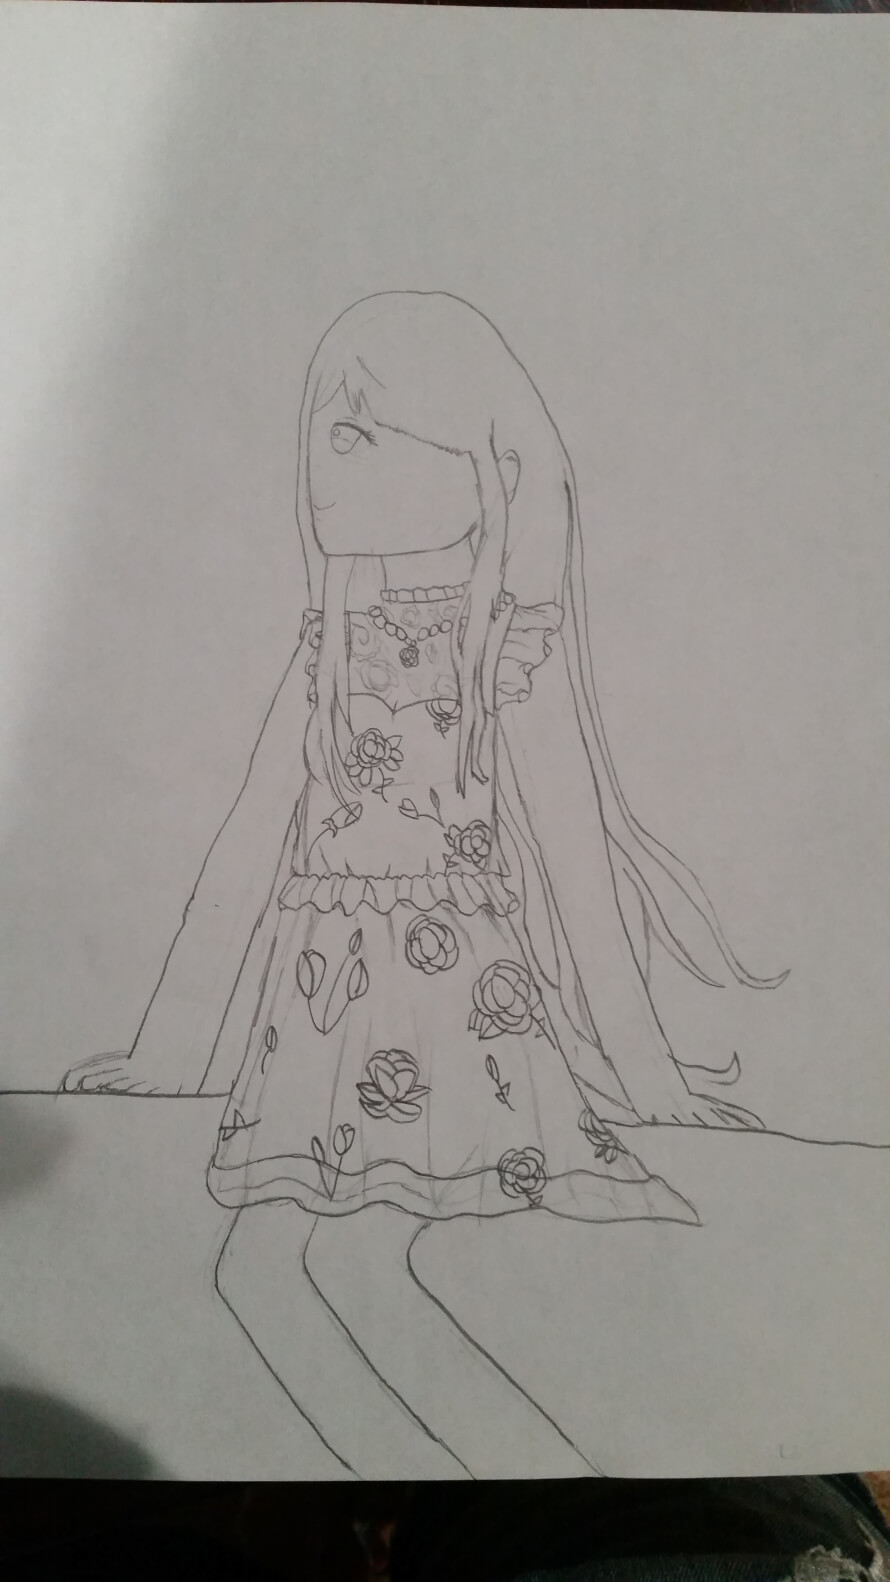   HEY LOOK, SOMETHING!

Decided to do fanart of Nikki from the popular dressup game, Love Nikki!...